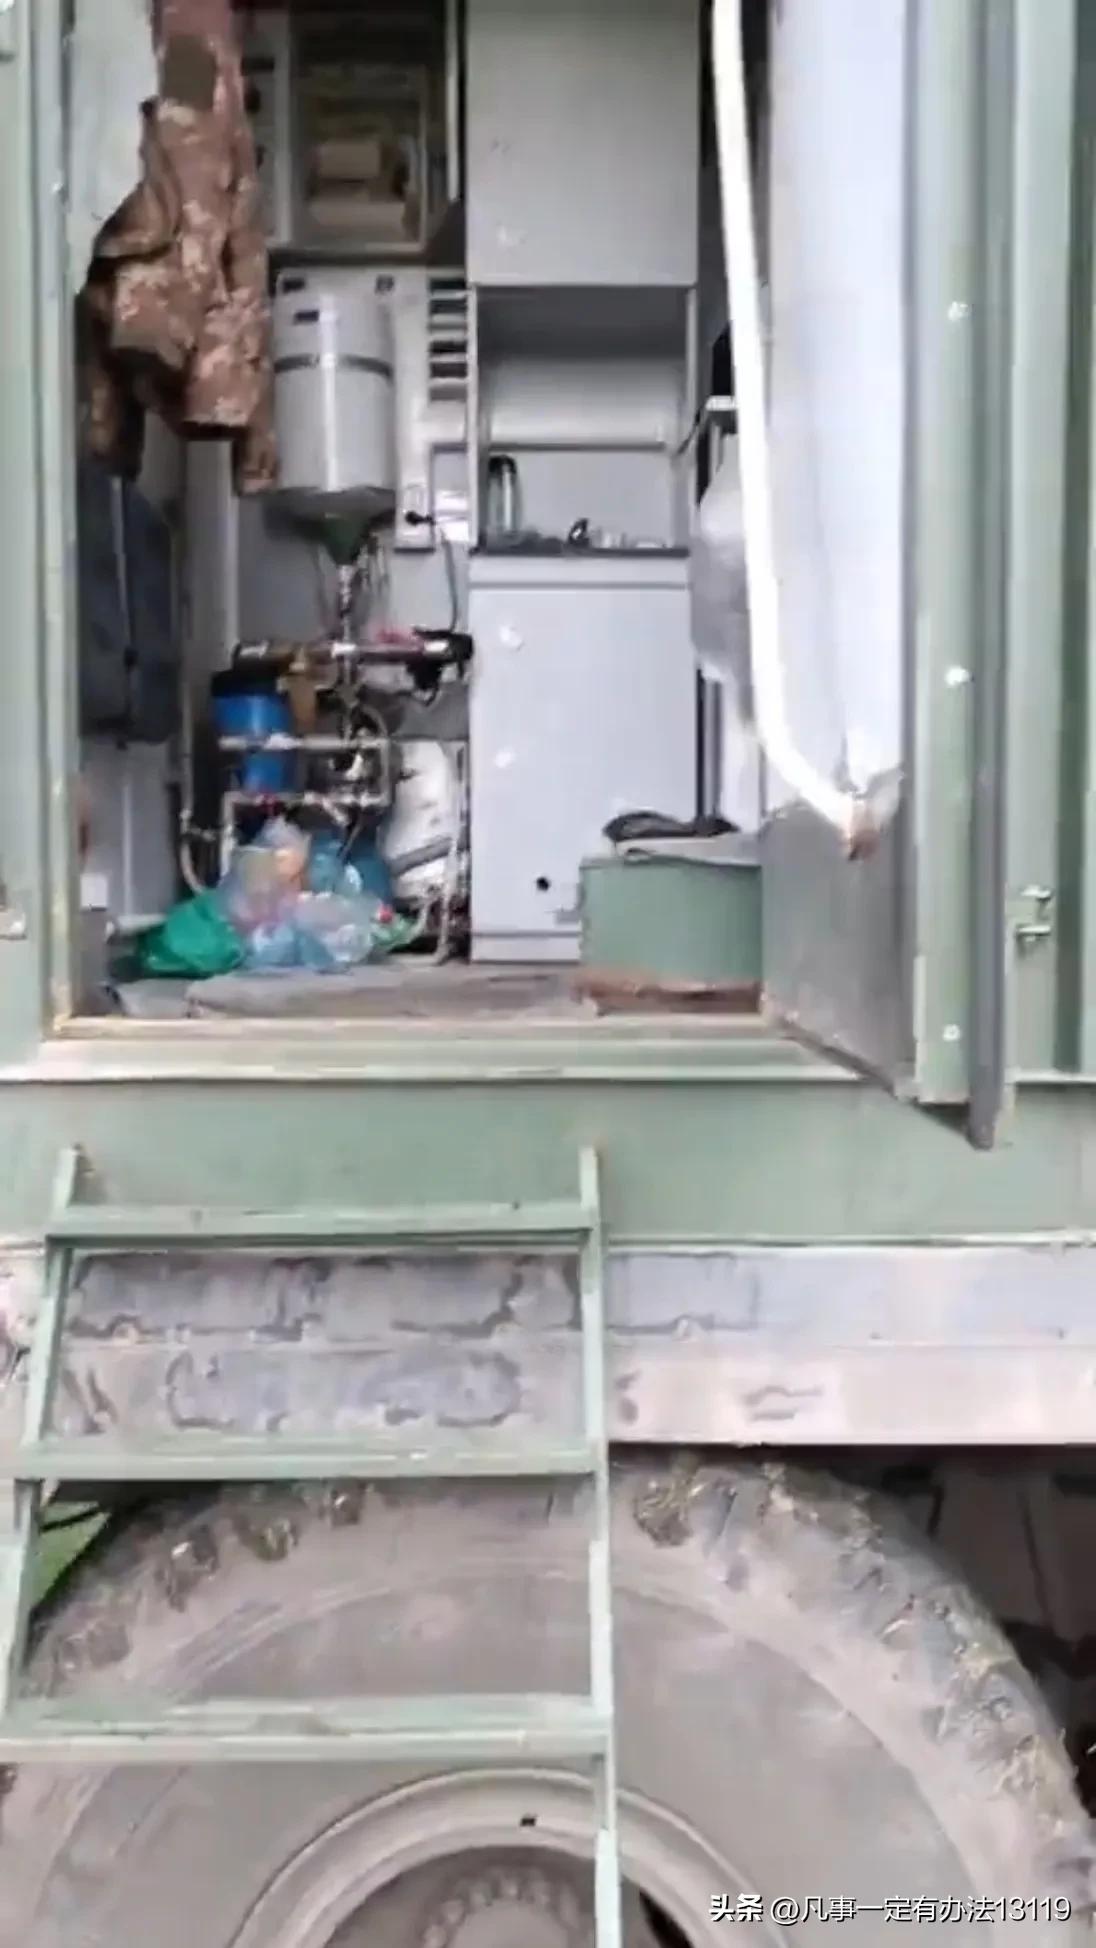 The Ukrainian army has mobile laundry rooms, cafeterias, and showers ...